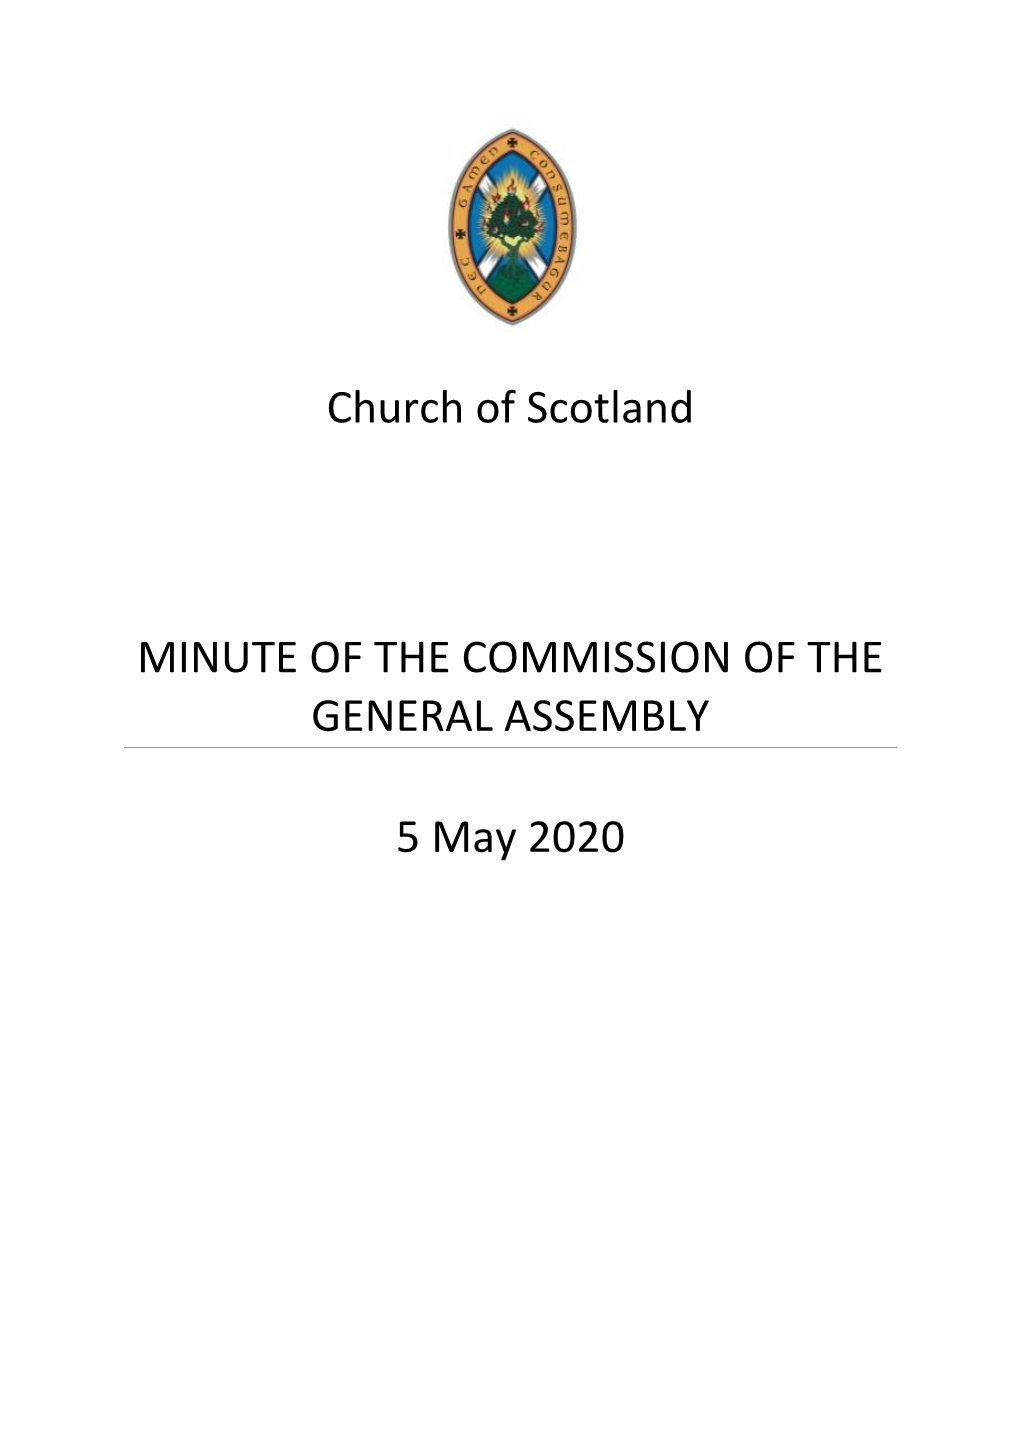 Minute of the Commission of the General Assembly